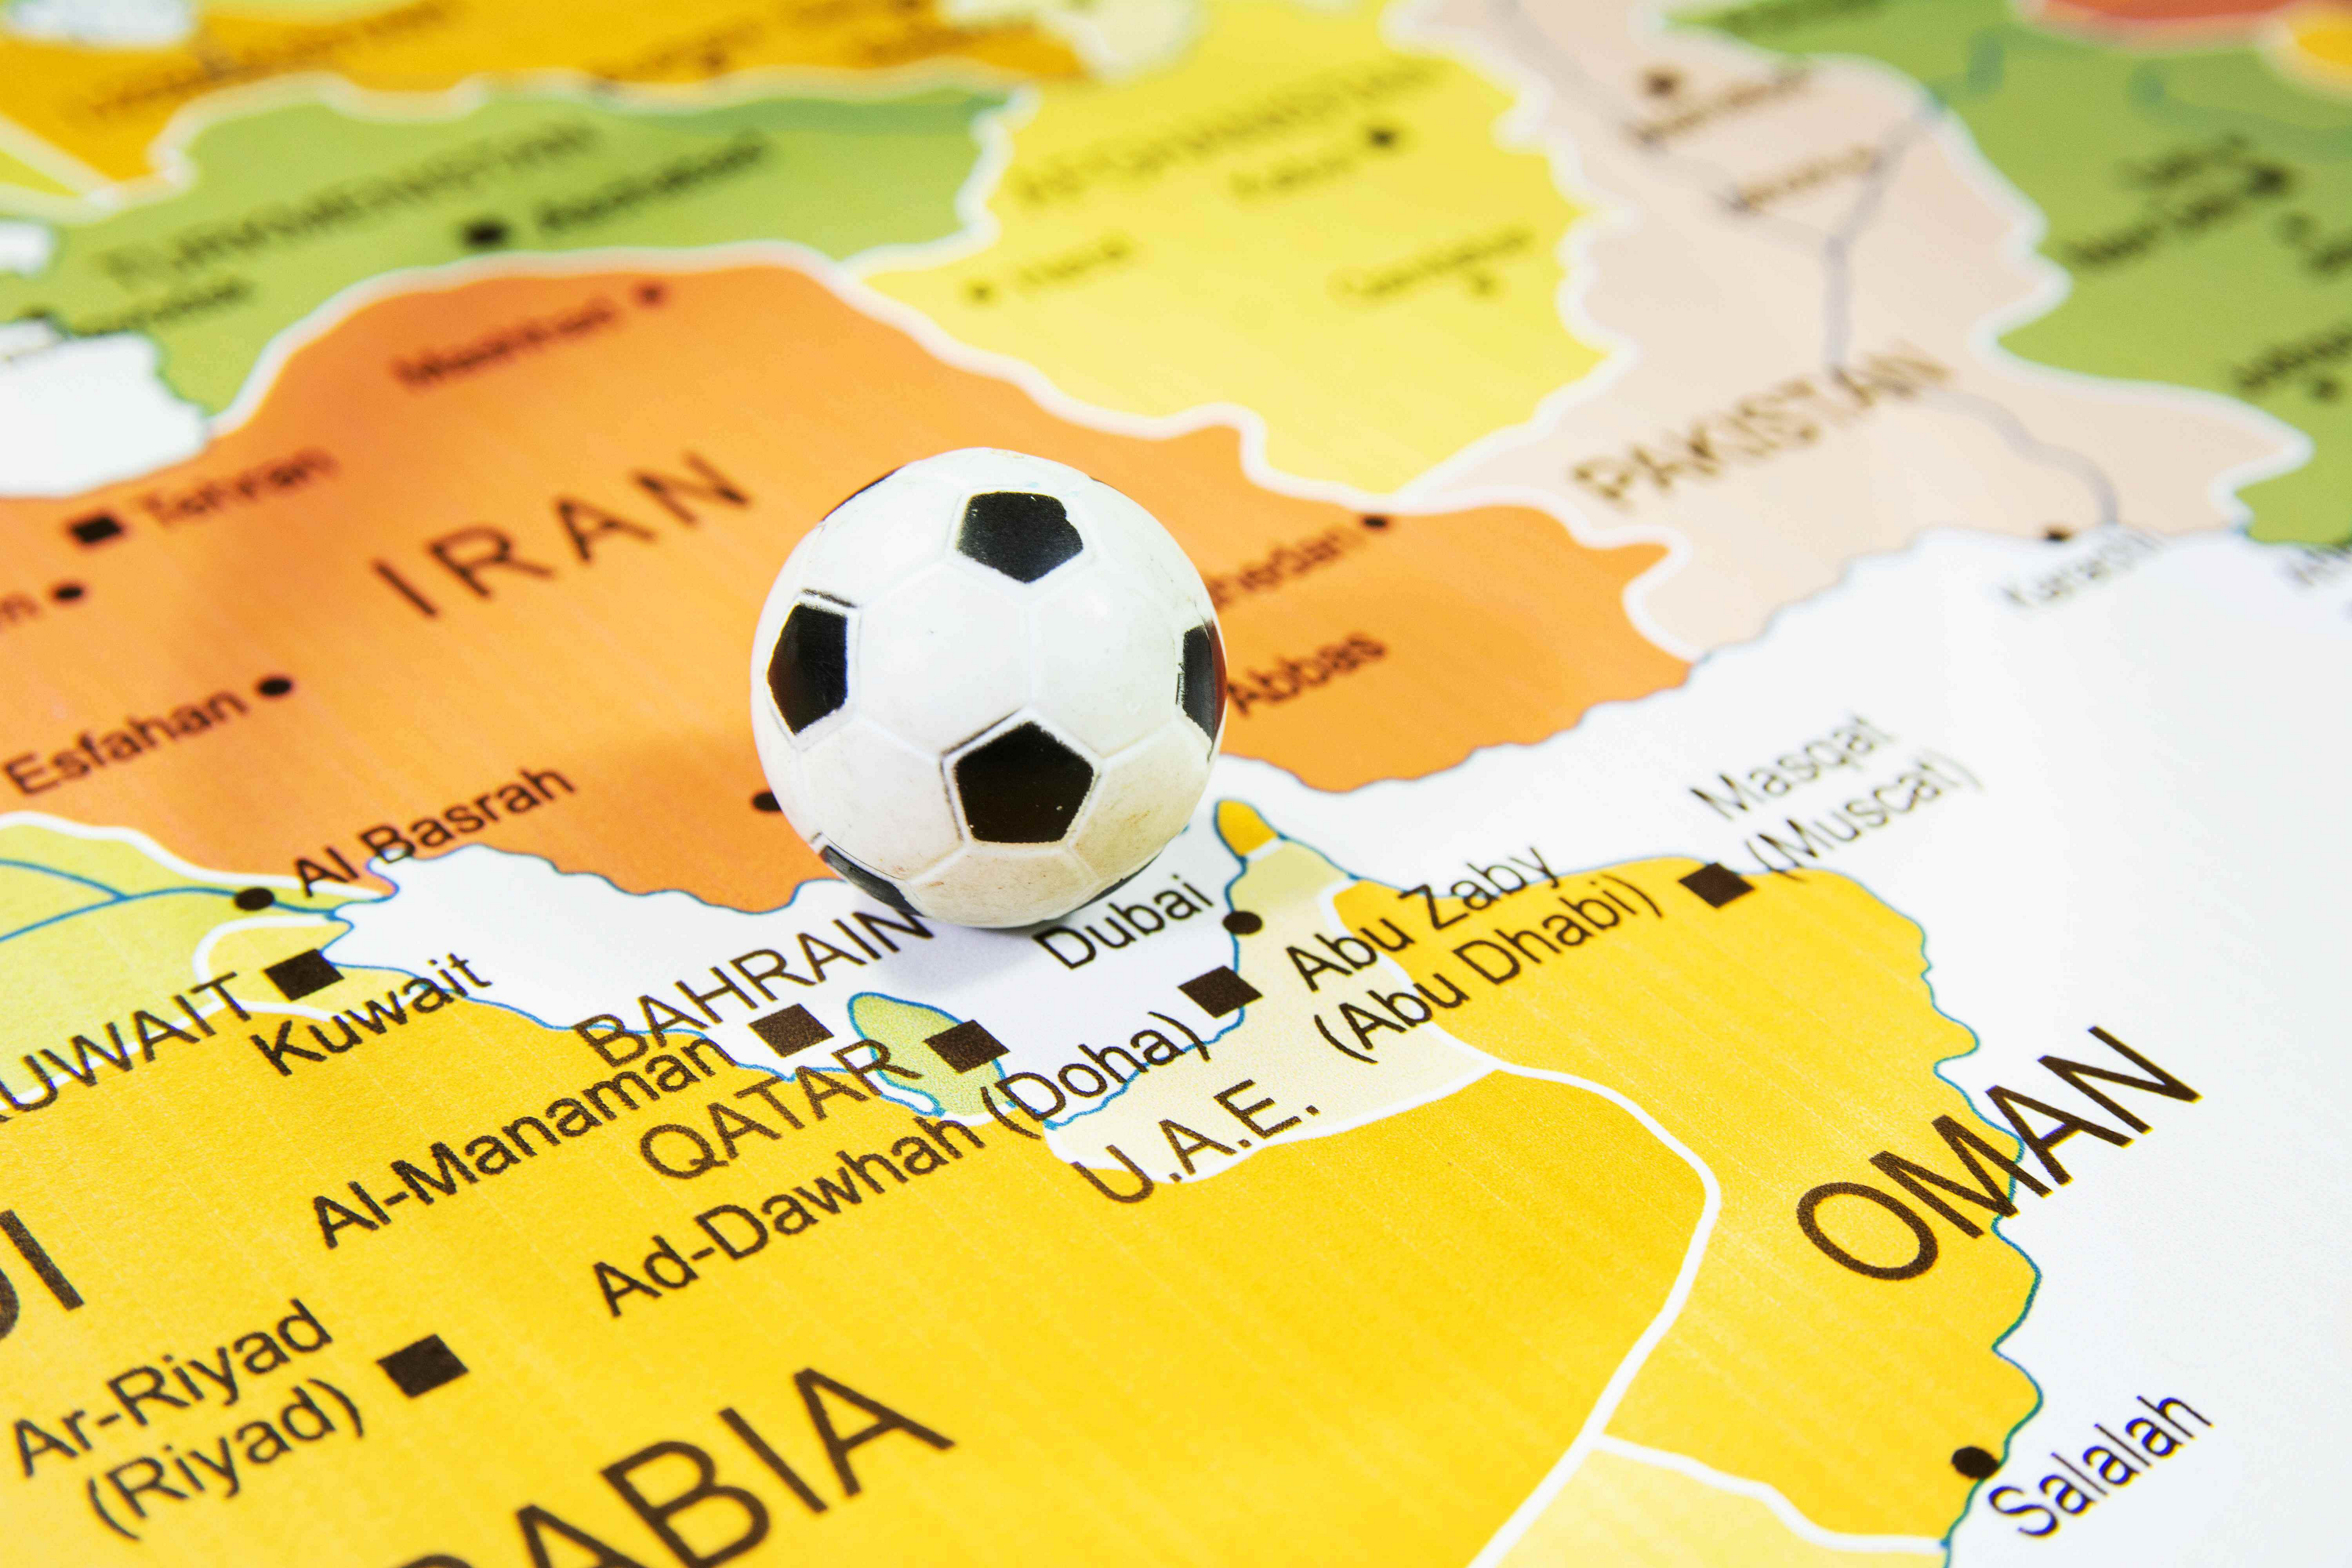 Enjoy the action of Qatar 2022 up close and live during the world cup with middle east travel